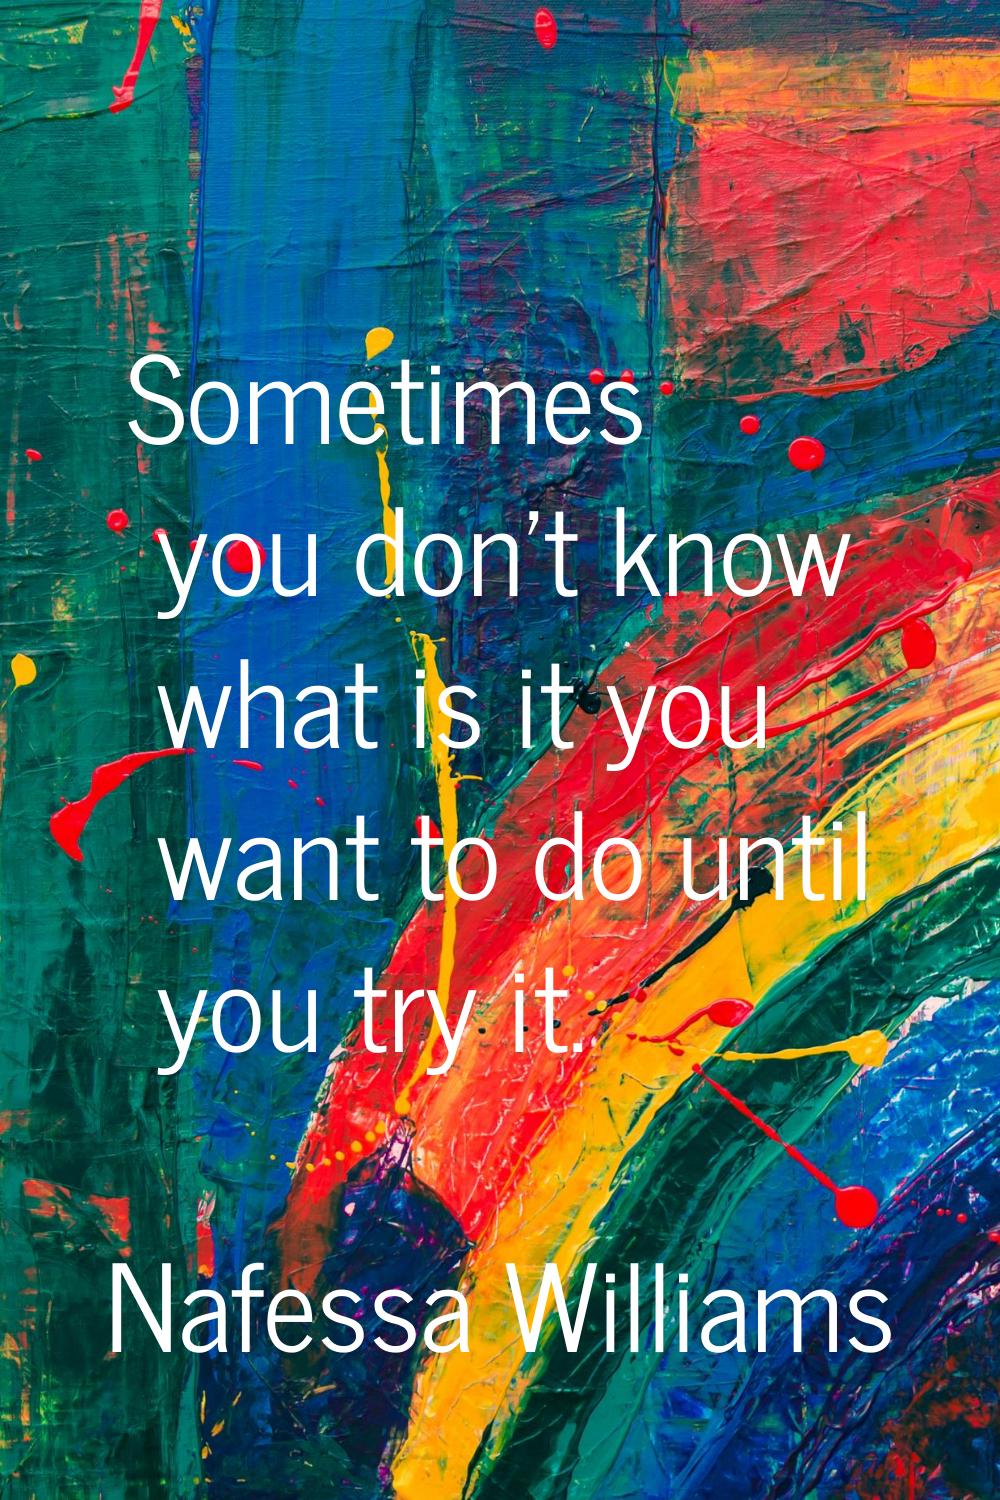 Sometimes you don't know what is it you want to do until you try it.